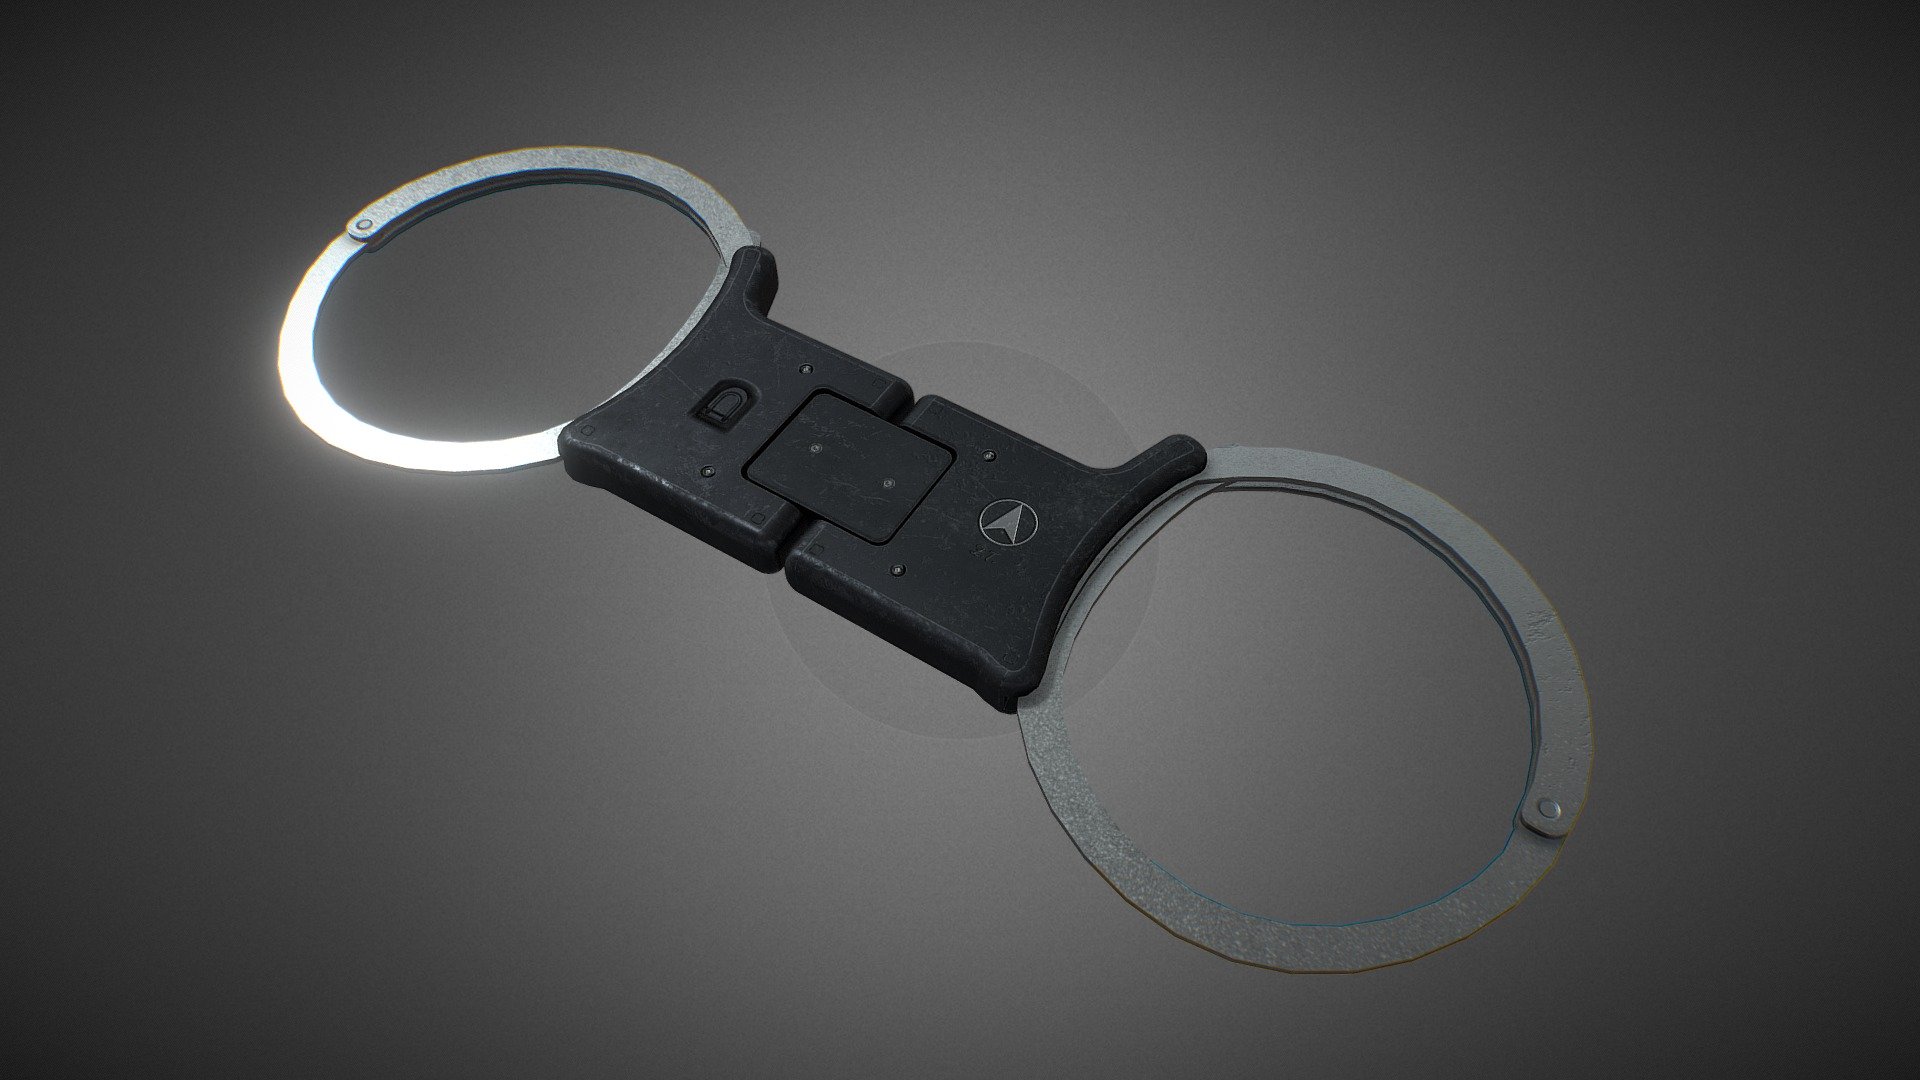 Rigid handcuffs made in blender, unwrapped and with PBR 4K materials Polygon count: Vertices: 2180 Triangles: 4332 Number of materials: 1 Types of materials and texture maps and number of textures: PBR (BaseColor, Curve, AO, Height, Metallic, Roughness and Normal) - 1 Texture Texture dimensions: 4096x4096 UV mapping: Yes Rigging: No Animated: No - Rigid folding handcuffs - 3D model by zombitt 3d model